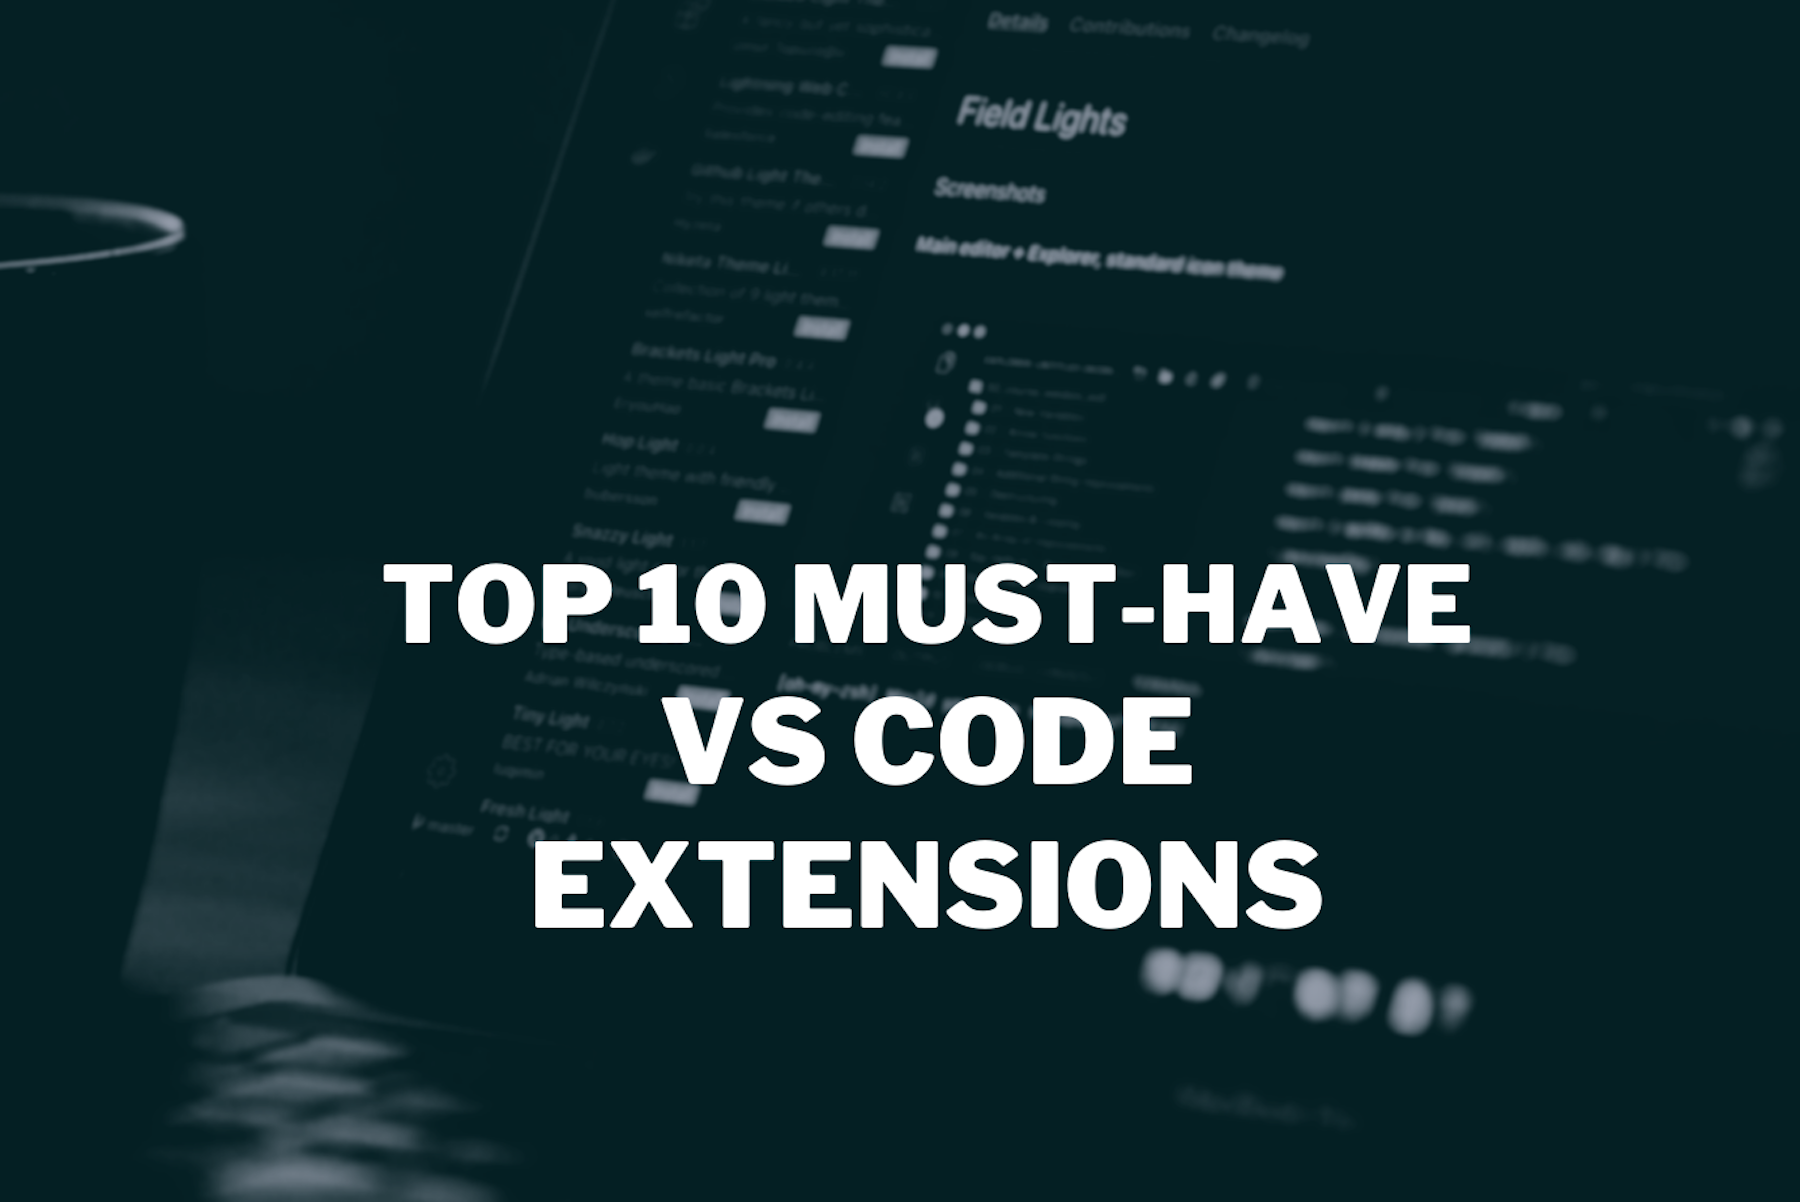 Top 10 Must Have VS Code Extensions for Developers